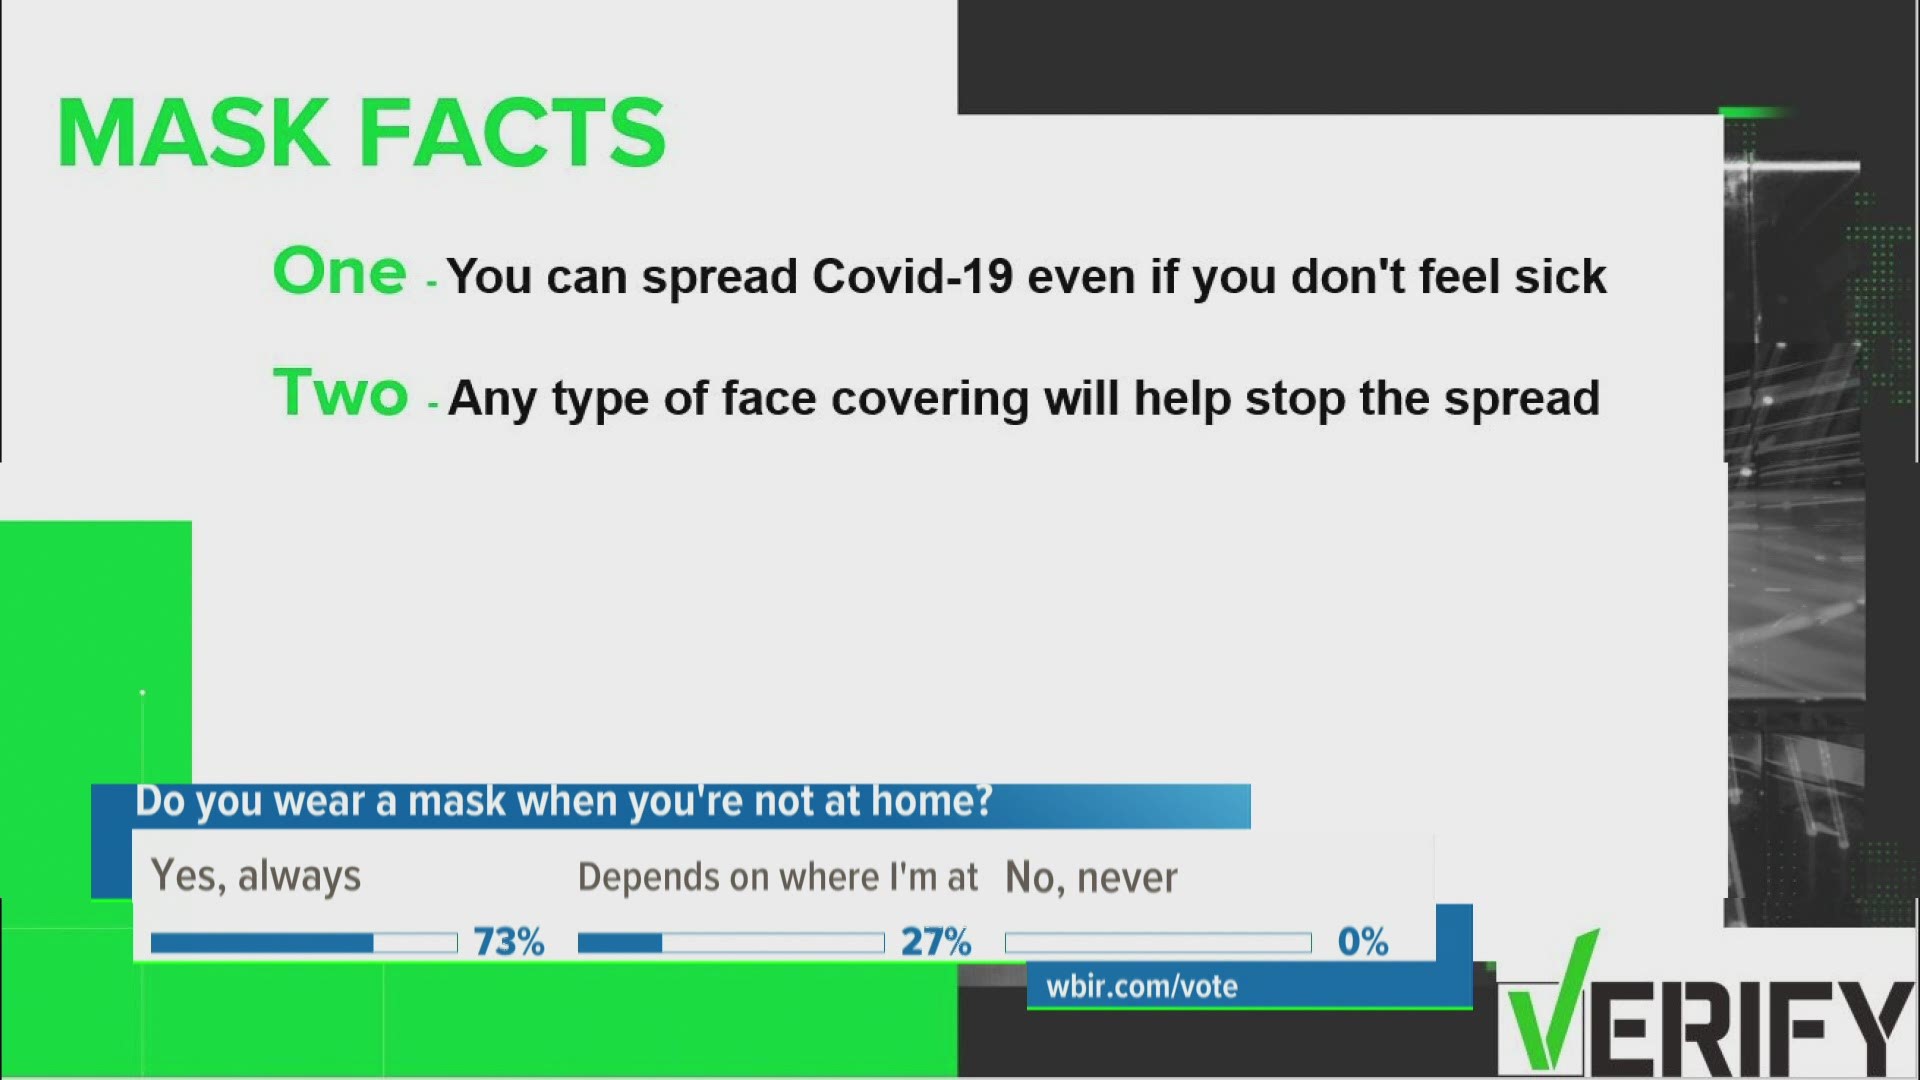 We debunk myths about wearing a mask during the COVID-19 outbreak.